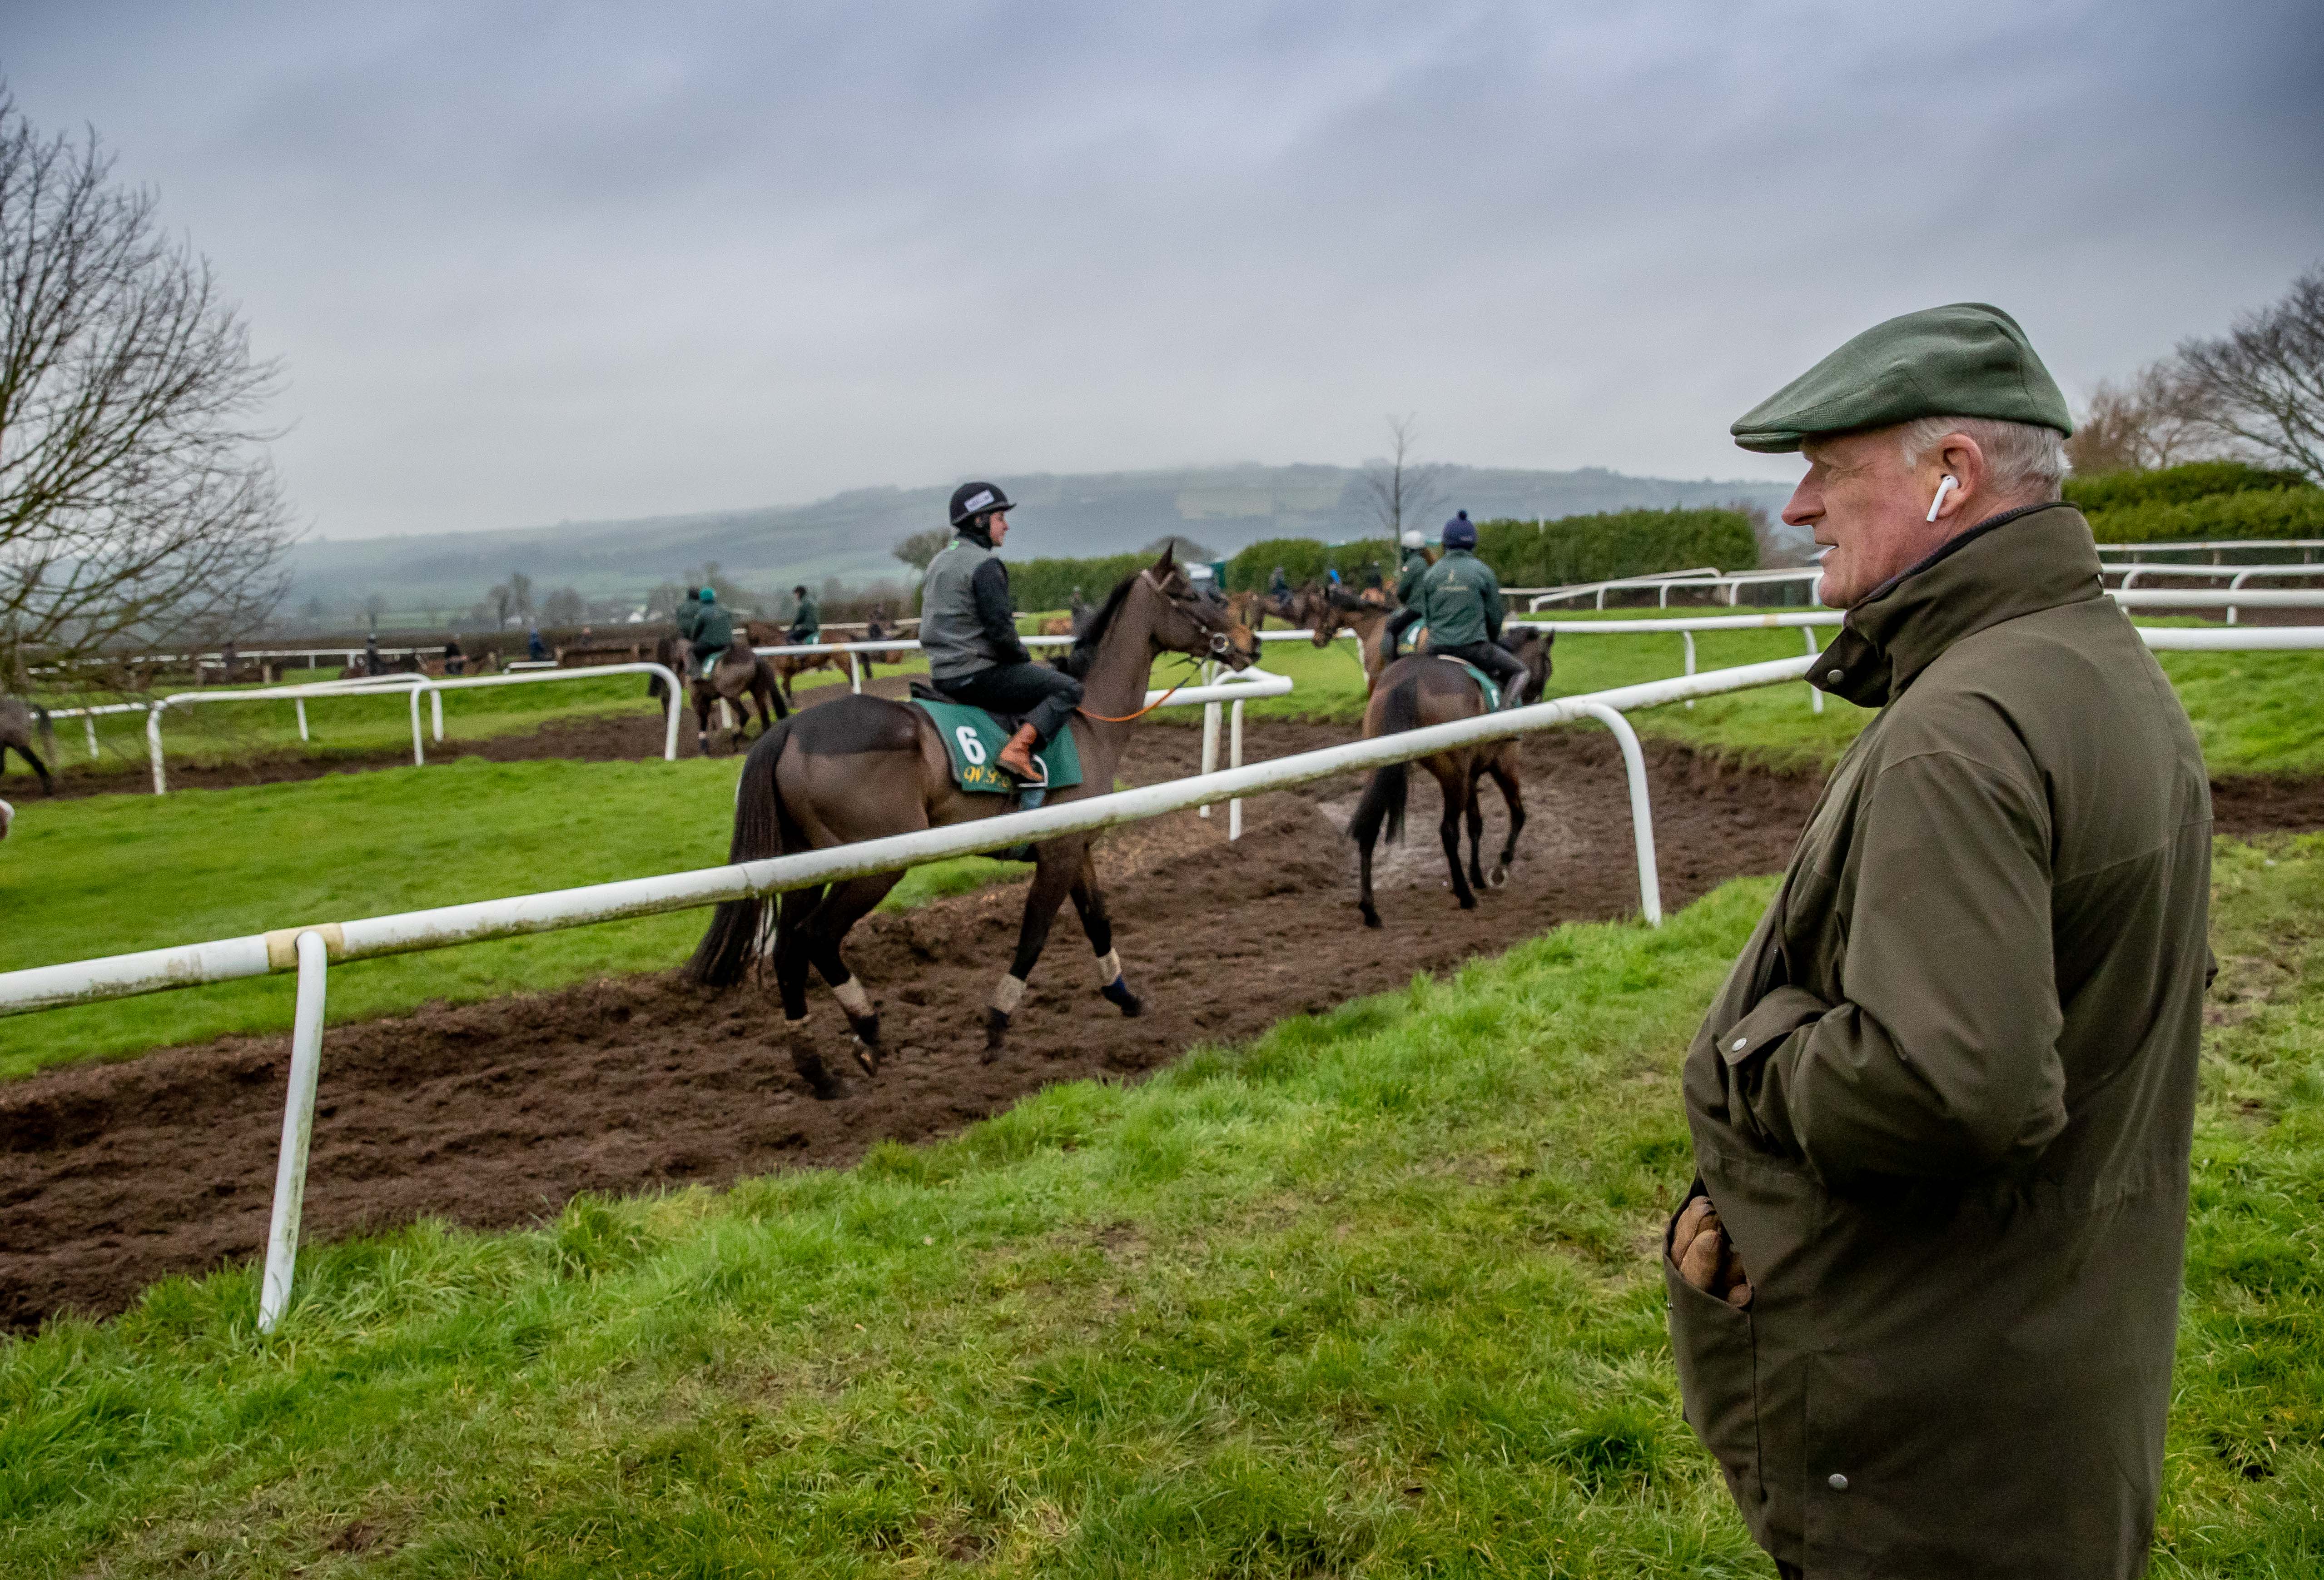  Mullins has a superb team heading to Cheltenham (Pic: Inpho Photography/ HRI)